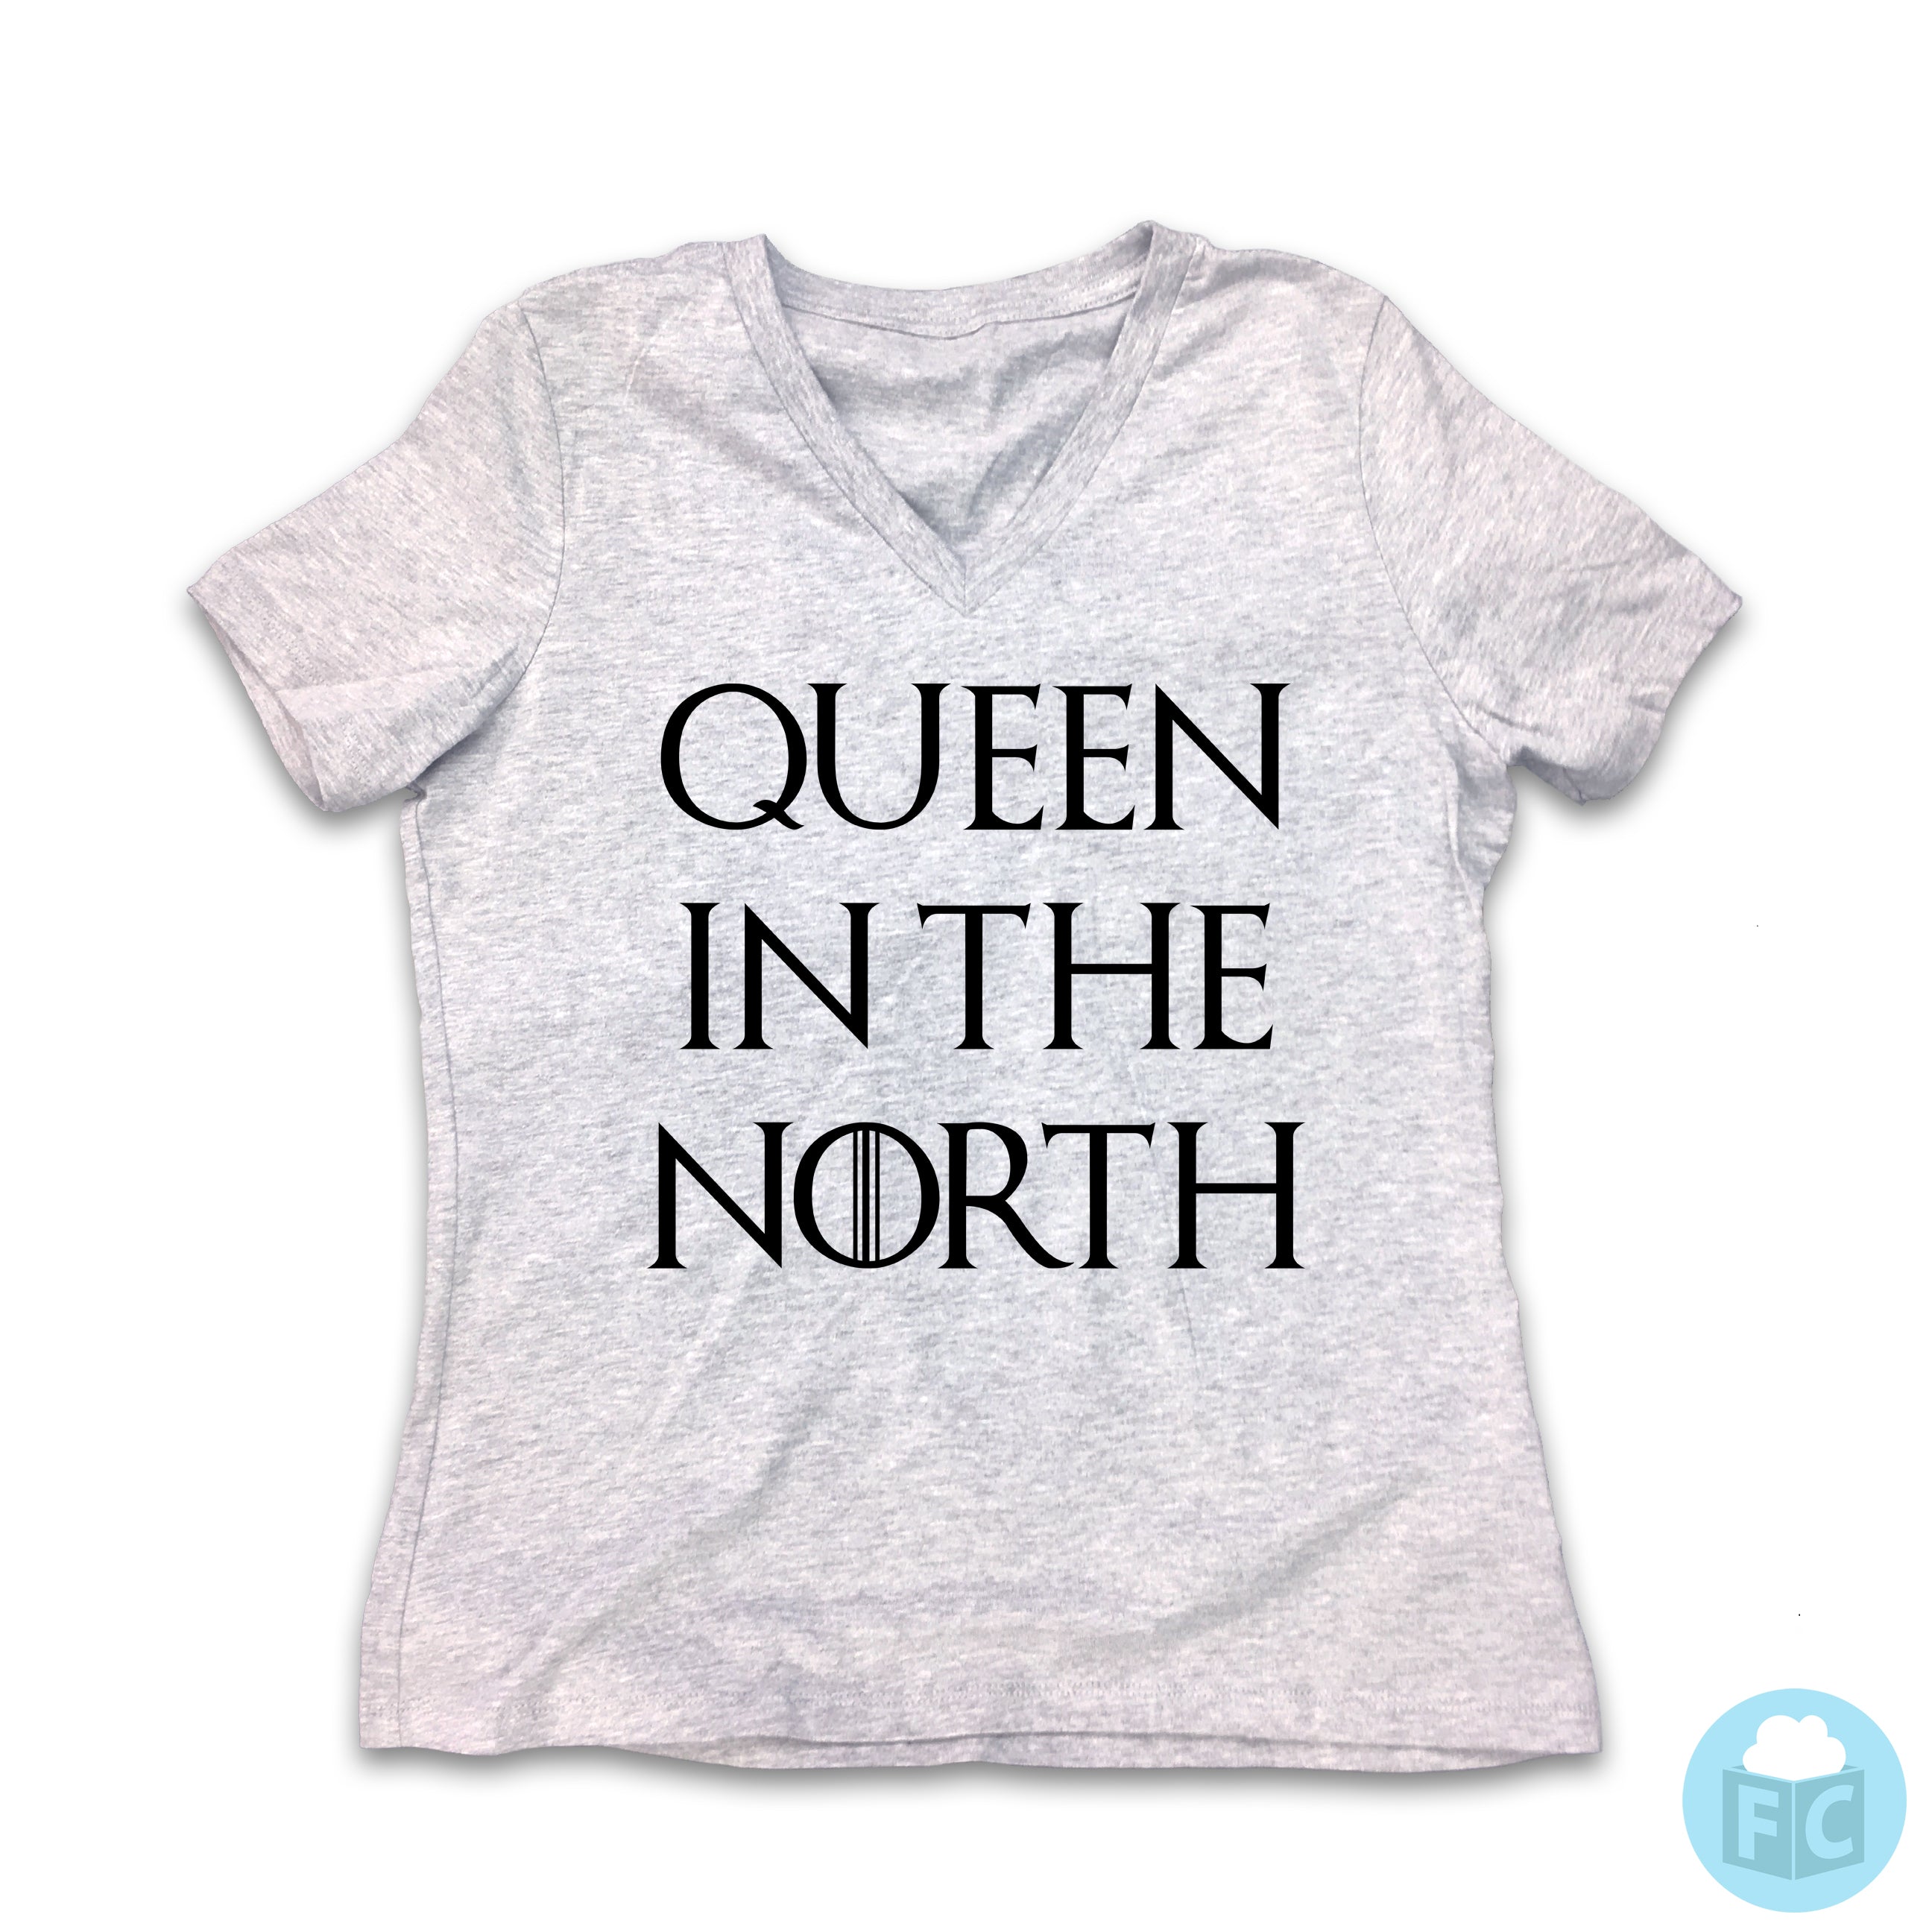 queen in the north shirt